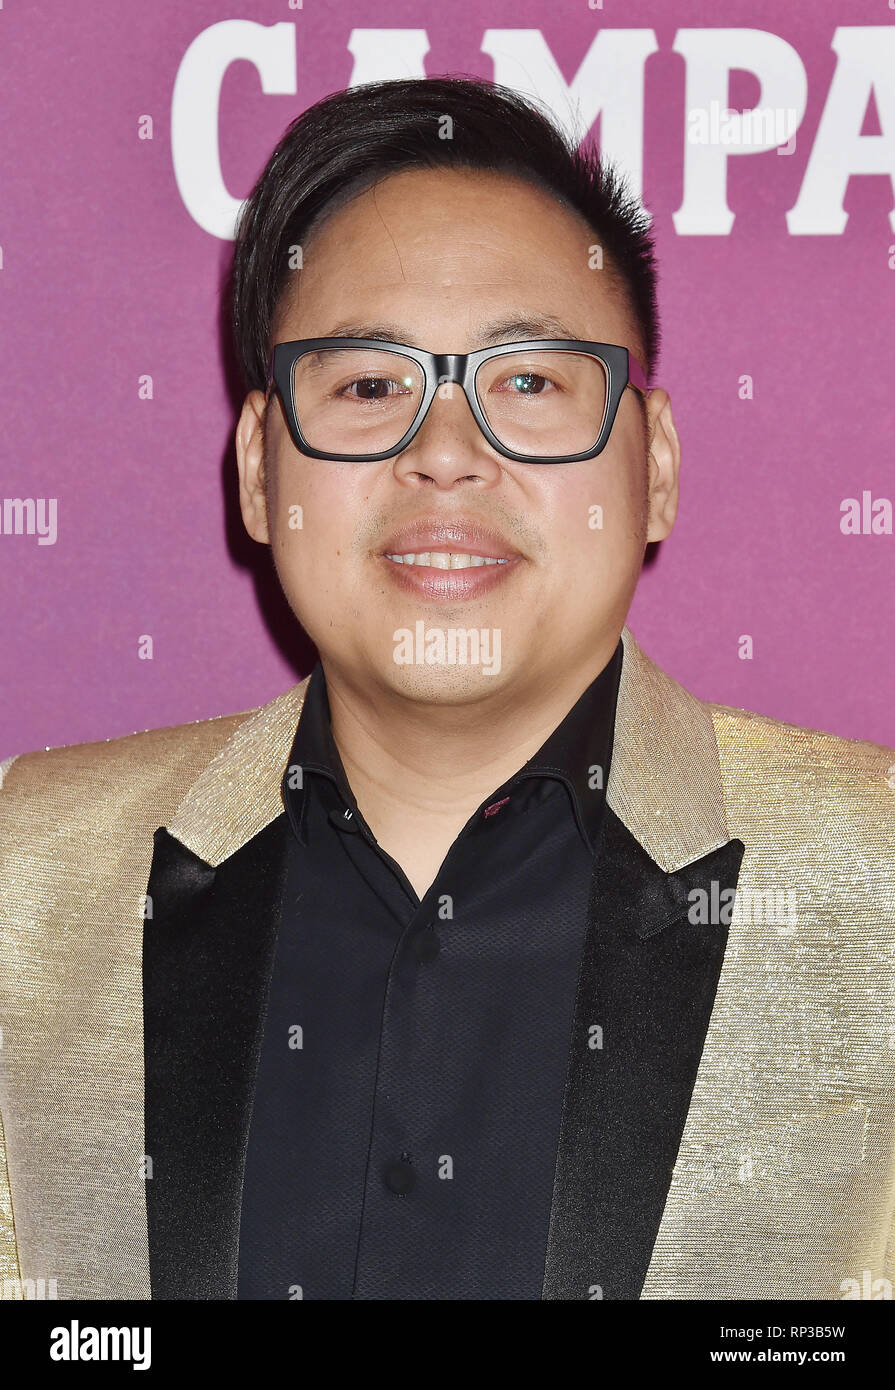 BEVERLY HILLS, CA - FEBRUARY 19: Nico Santos  arrives at the 21st CDGA (Costume Designers Guild Awards) at The Beverly Hilton Hotel on February 19, 20 Stock Photo